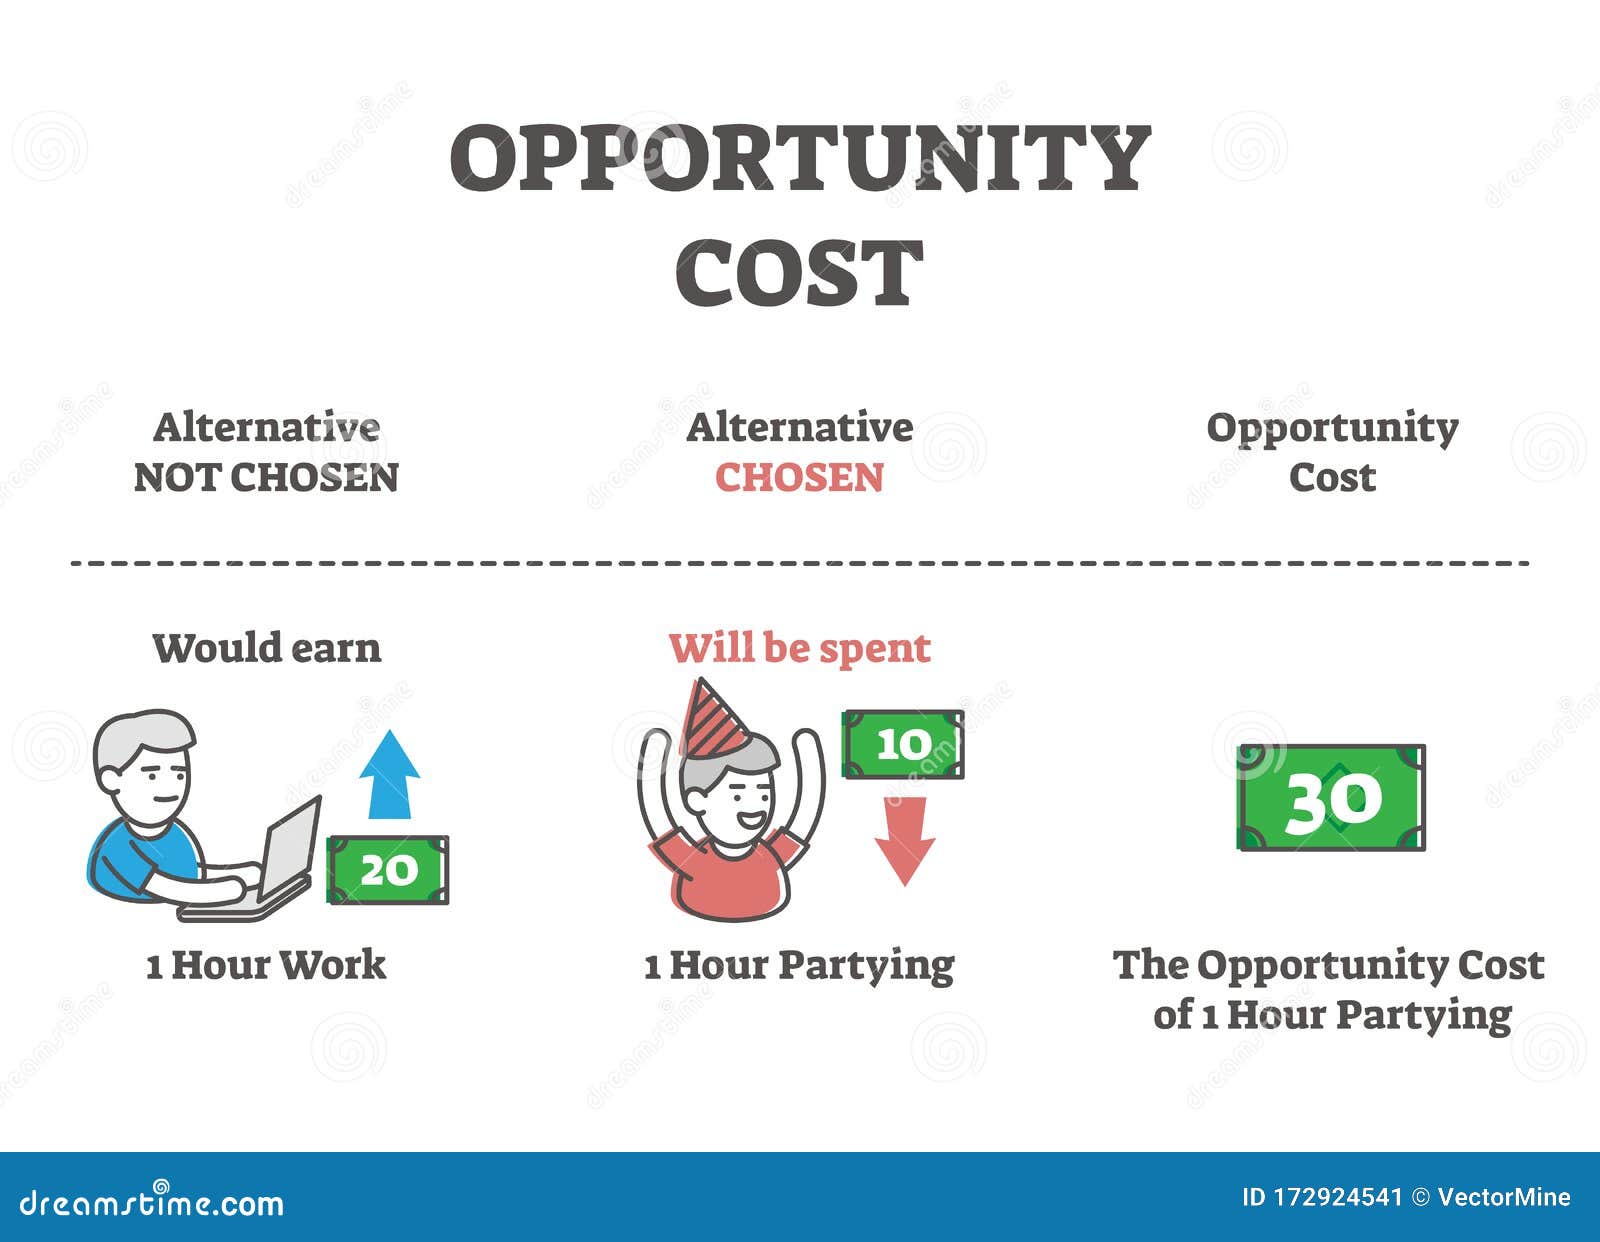 definition of opportunity cost essay